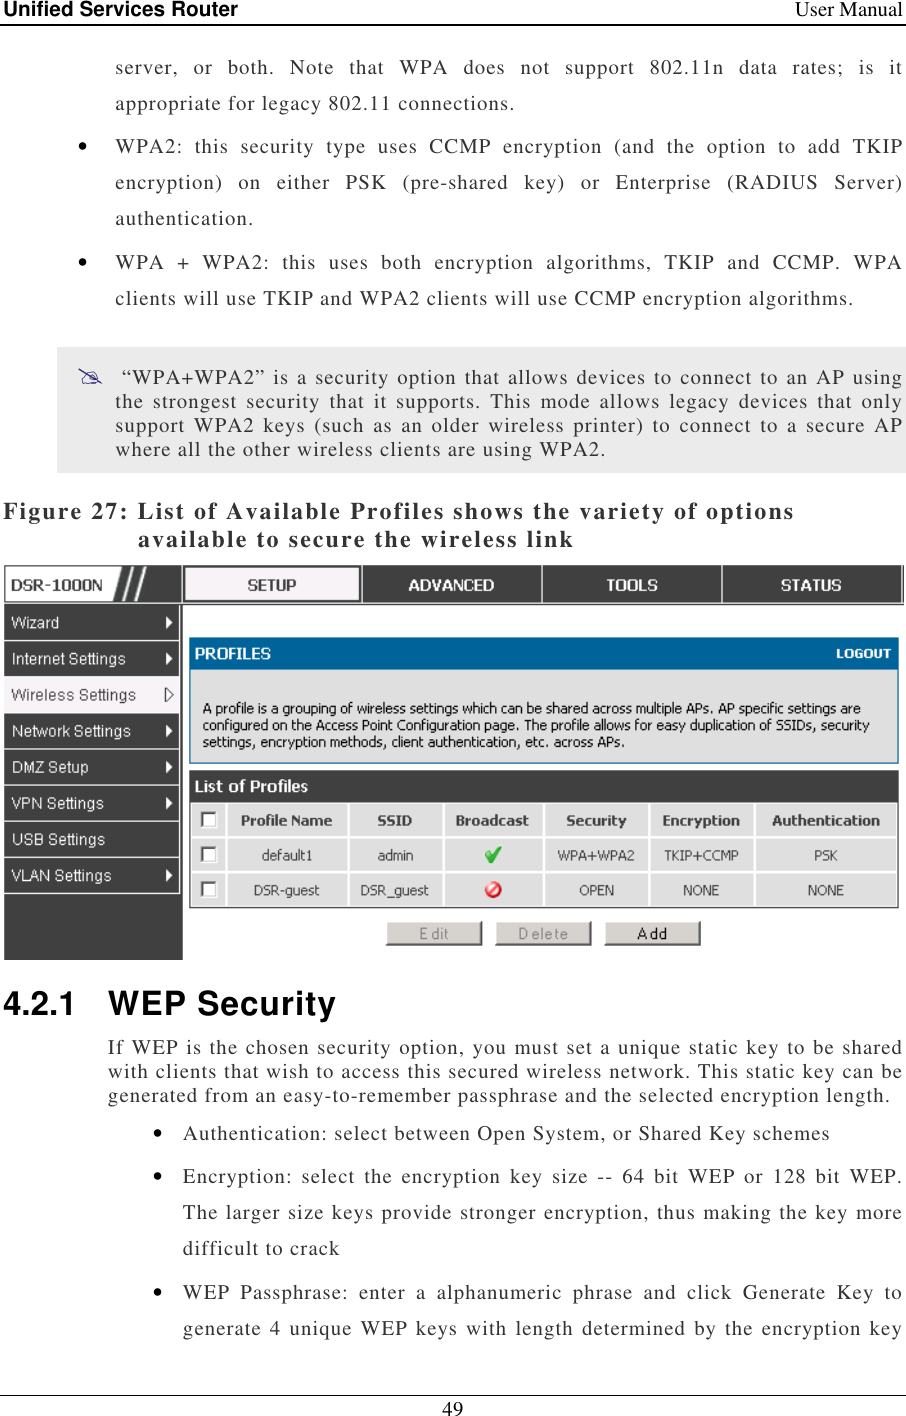 Unified Services Router    User Manual 49  server,  or  both.  Note  that  WPA  does  not  support  802.11n  data  rates;  is  it appropriate for legacy 802.11 connections. • WPA2:  this  security  type  uses  CCMP  encryption  (and  the  option  to  add  TKIP encryption)  on  either  PSK  (pre-shared  key)  or  Enterprise  (RADIUS  Server) authentication. • WPA  +  WPA2:  this  uses  both  encryption  algorithms,  TKIP  and  CCMP.  WPA clients will use TKIP and WPA2 clients will use CCMP encryption algorithms.   “WPA+WPA2” is a security option that  allows devices to connect  to an AP using the  strongest  security  that  it  supports.  This  mode  allows  legacy  devices  that  only support WPA2  keys  (such  as  an  older  wireless  printer)  to  connect  to  a  secure  AP where all the other wireless clients are using WPA2.  Figure 27: List of Available Profiles shows the variety of options available to secure the wireless link  4.2.1  WEP Security If WEP is the chosen security option, you must set a unique static key to be shared with clients that wish to access this secured wireless network. This static key can be generated from an easy-to-remember passphrase and the selected encryption length. • Authentication: select between Open System, or Shared Key schemes • Encryption:  select  the  encryption  key  size  --  64  bit  WEP  or  128  bit  WEP. The larger size keys provide stronger encryption, thus making the key more difficult to crack • WEP  Passphrase:  enter  a  alphanumeric  phrase  and  click  Generate  Key  to generate 4 unique WEP keys with  length  determined  by  the encryption  key 